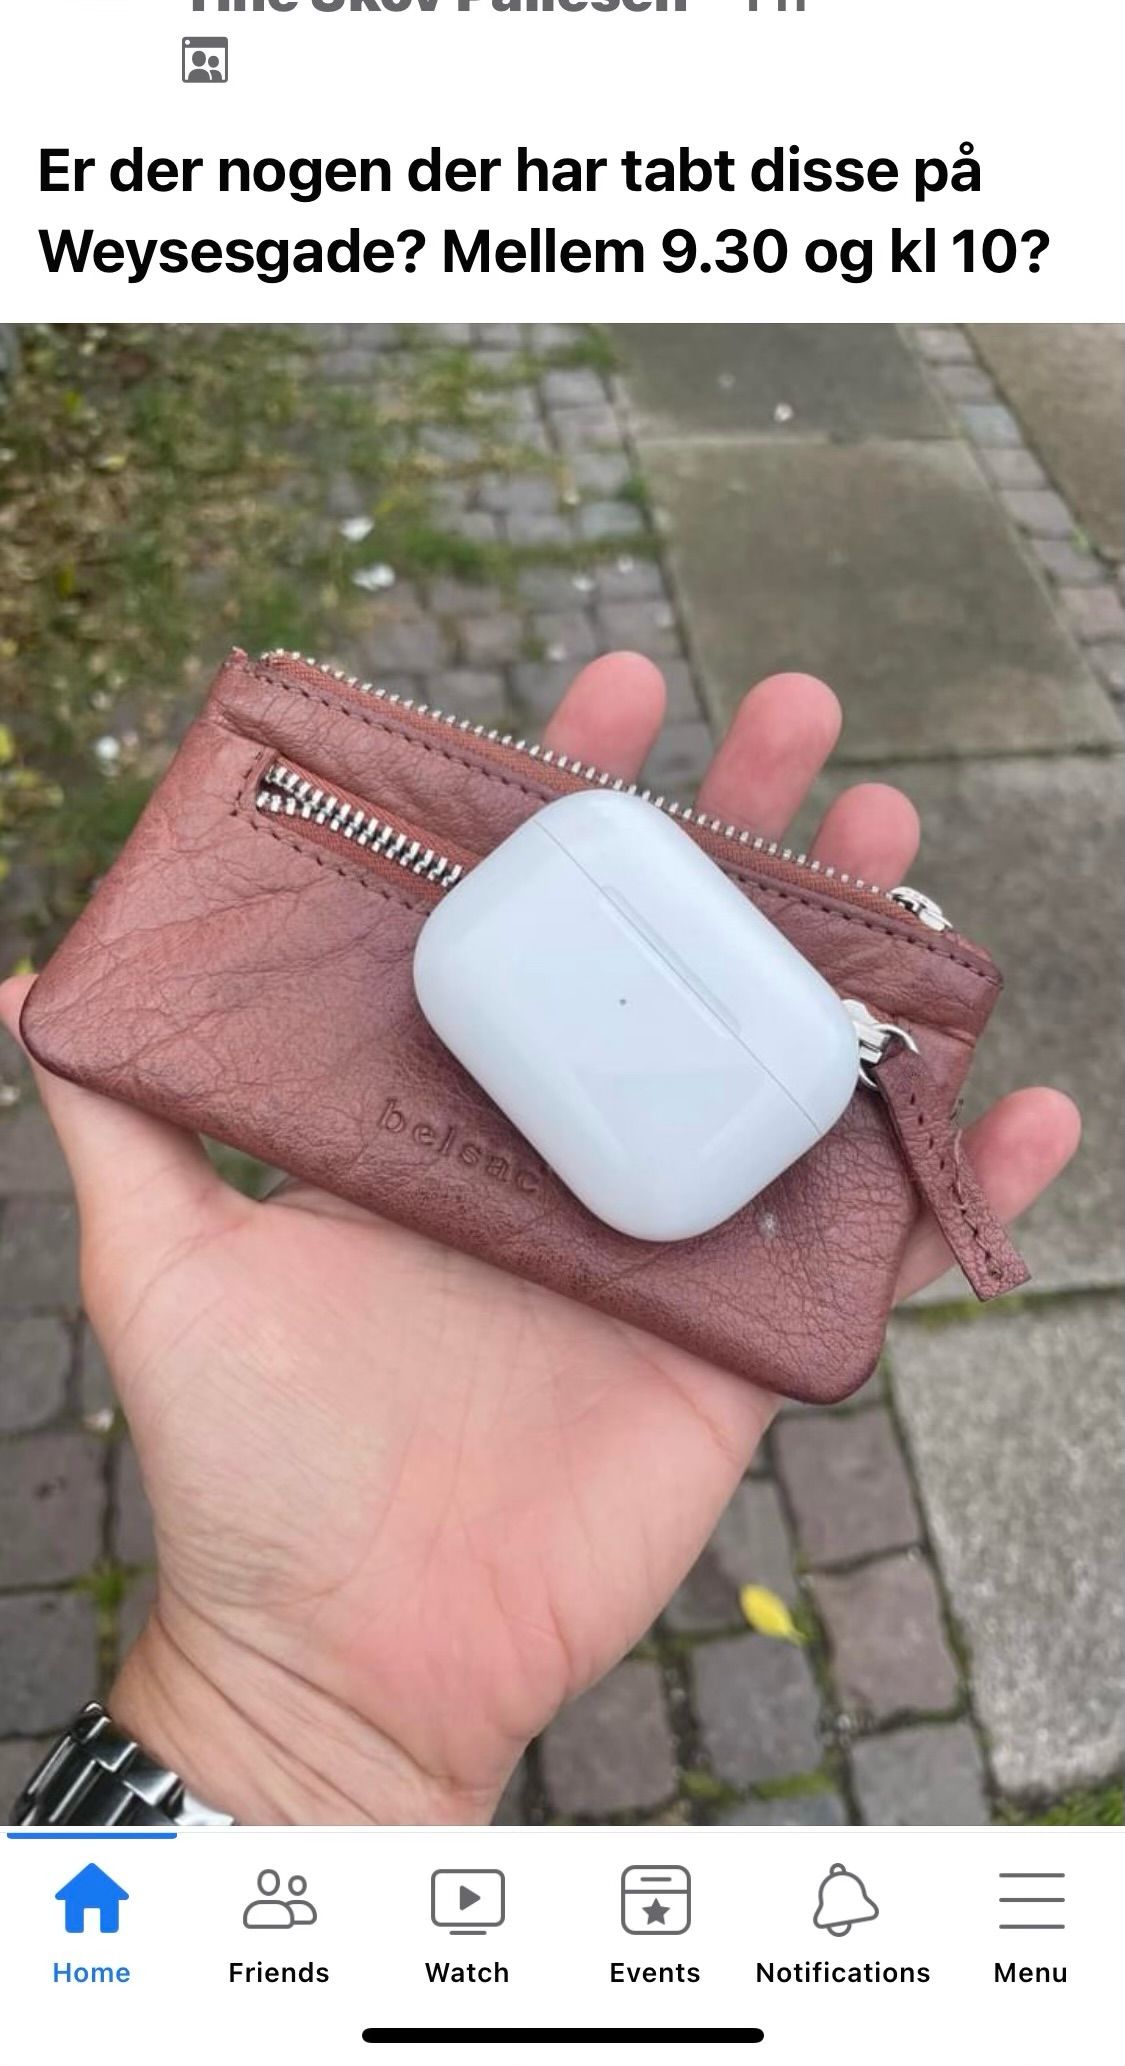 Get Your Biering’s: The lost airpods and Danish trust